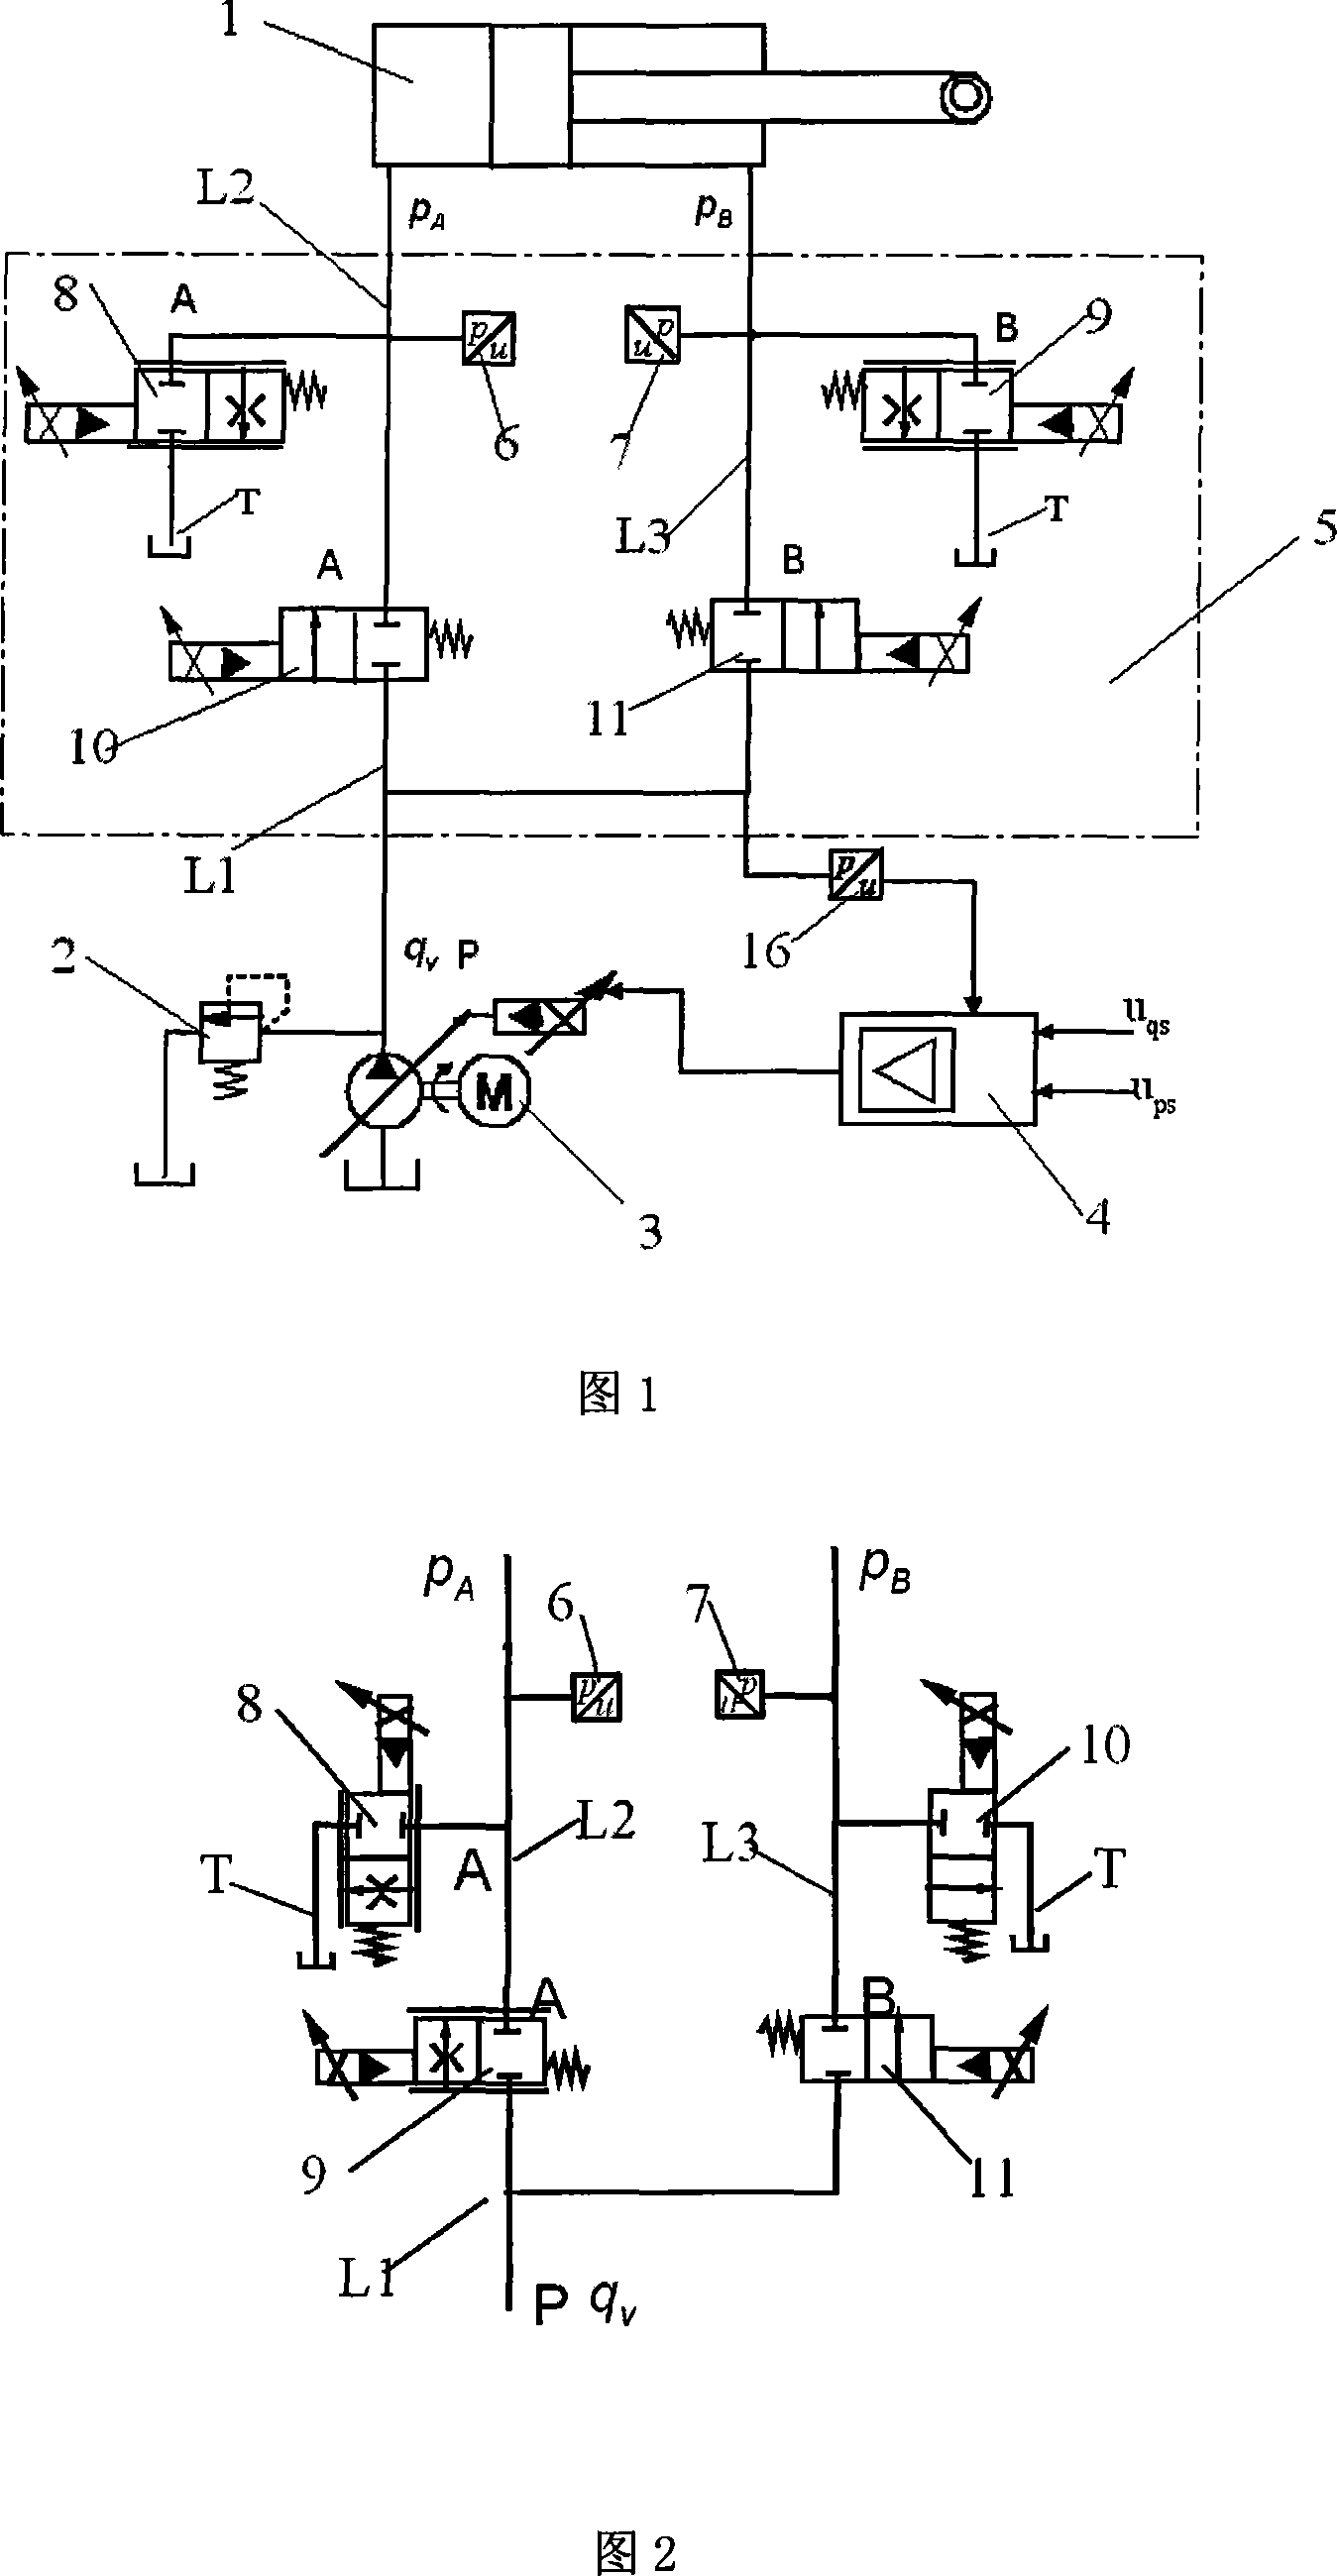 Independent control electrohydraulic system of oil inlet and outlet with pump valve composite flux matched